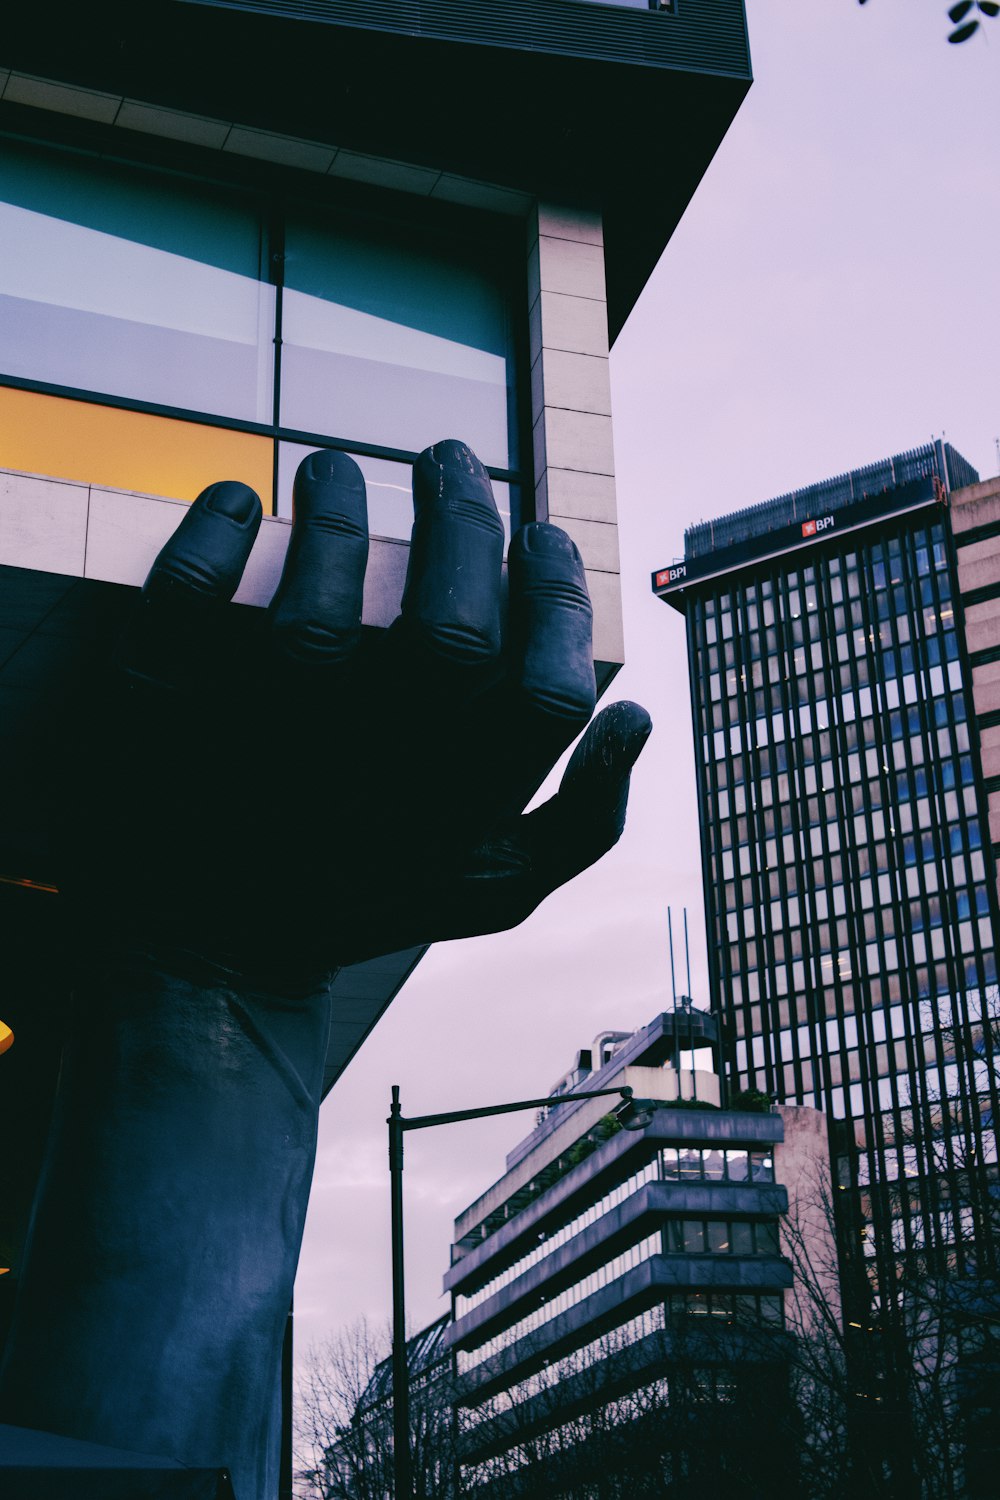 a statue of a hand reaching out of a building